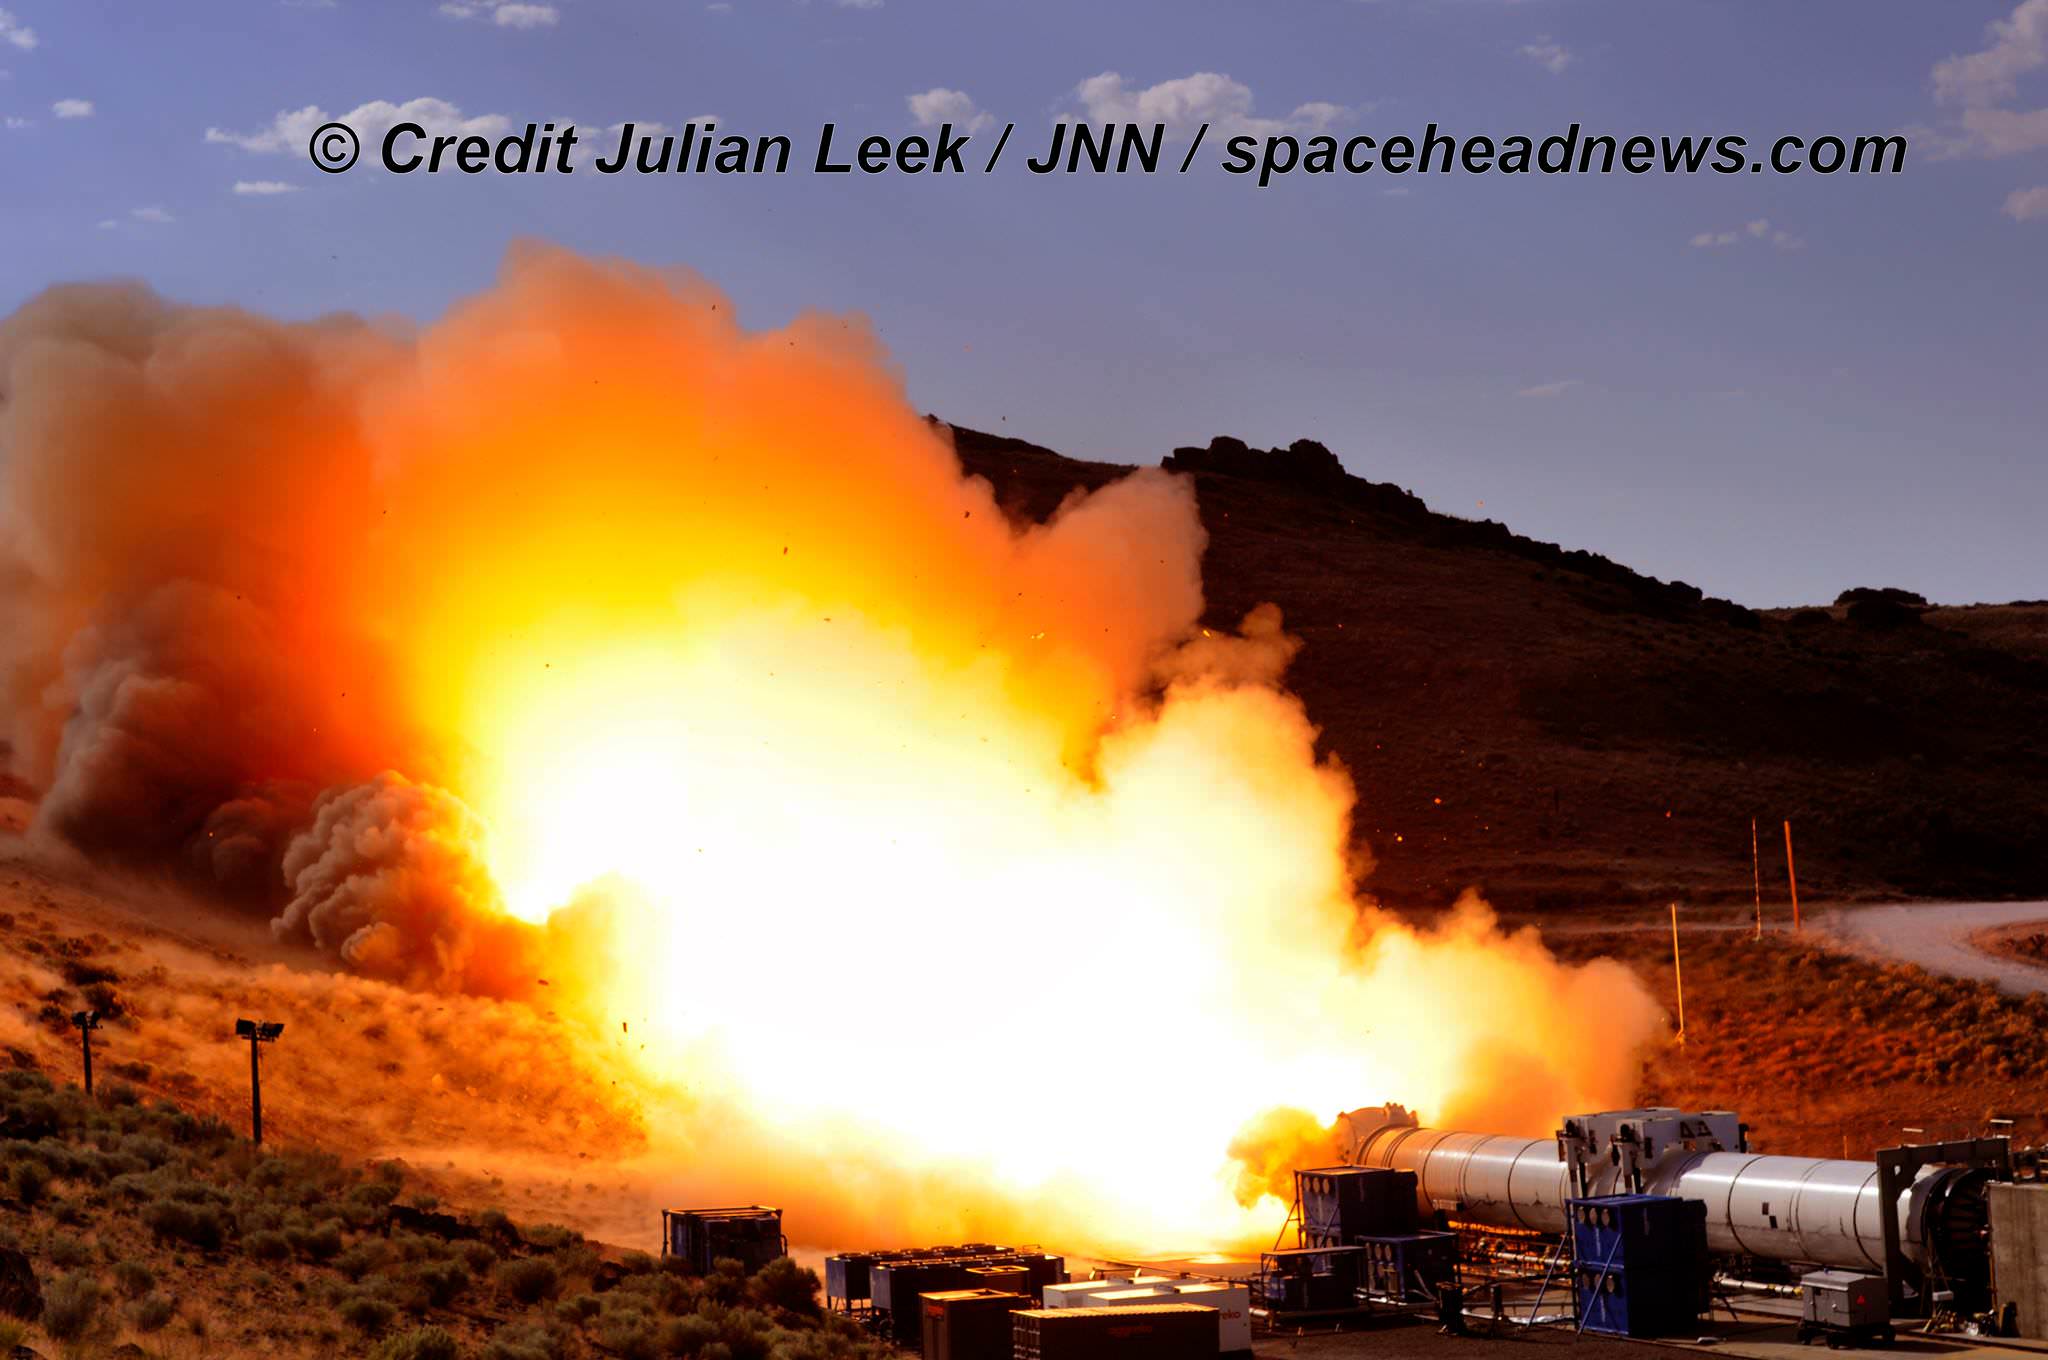 Ignition of the qualification motor (QM-2) booster during test firing for NASA’s Space Launch System as seen on Tuesday, June 28, 2016, at Orbital ATK Propulsion System's (SLS) test facilities in Promontory, Utah.  Credit: Julian Leek 